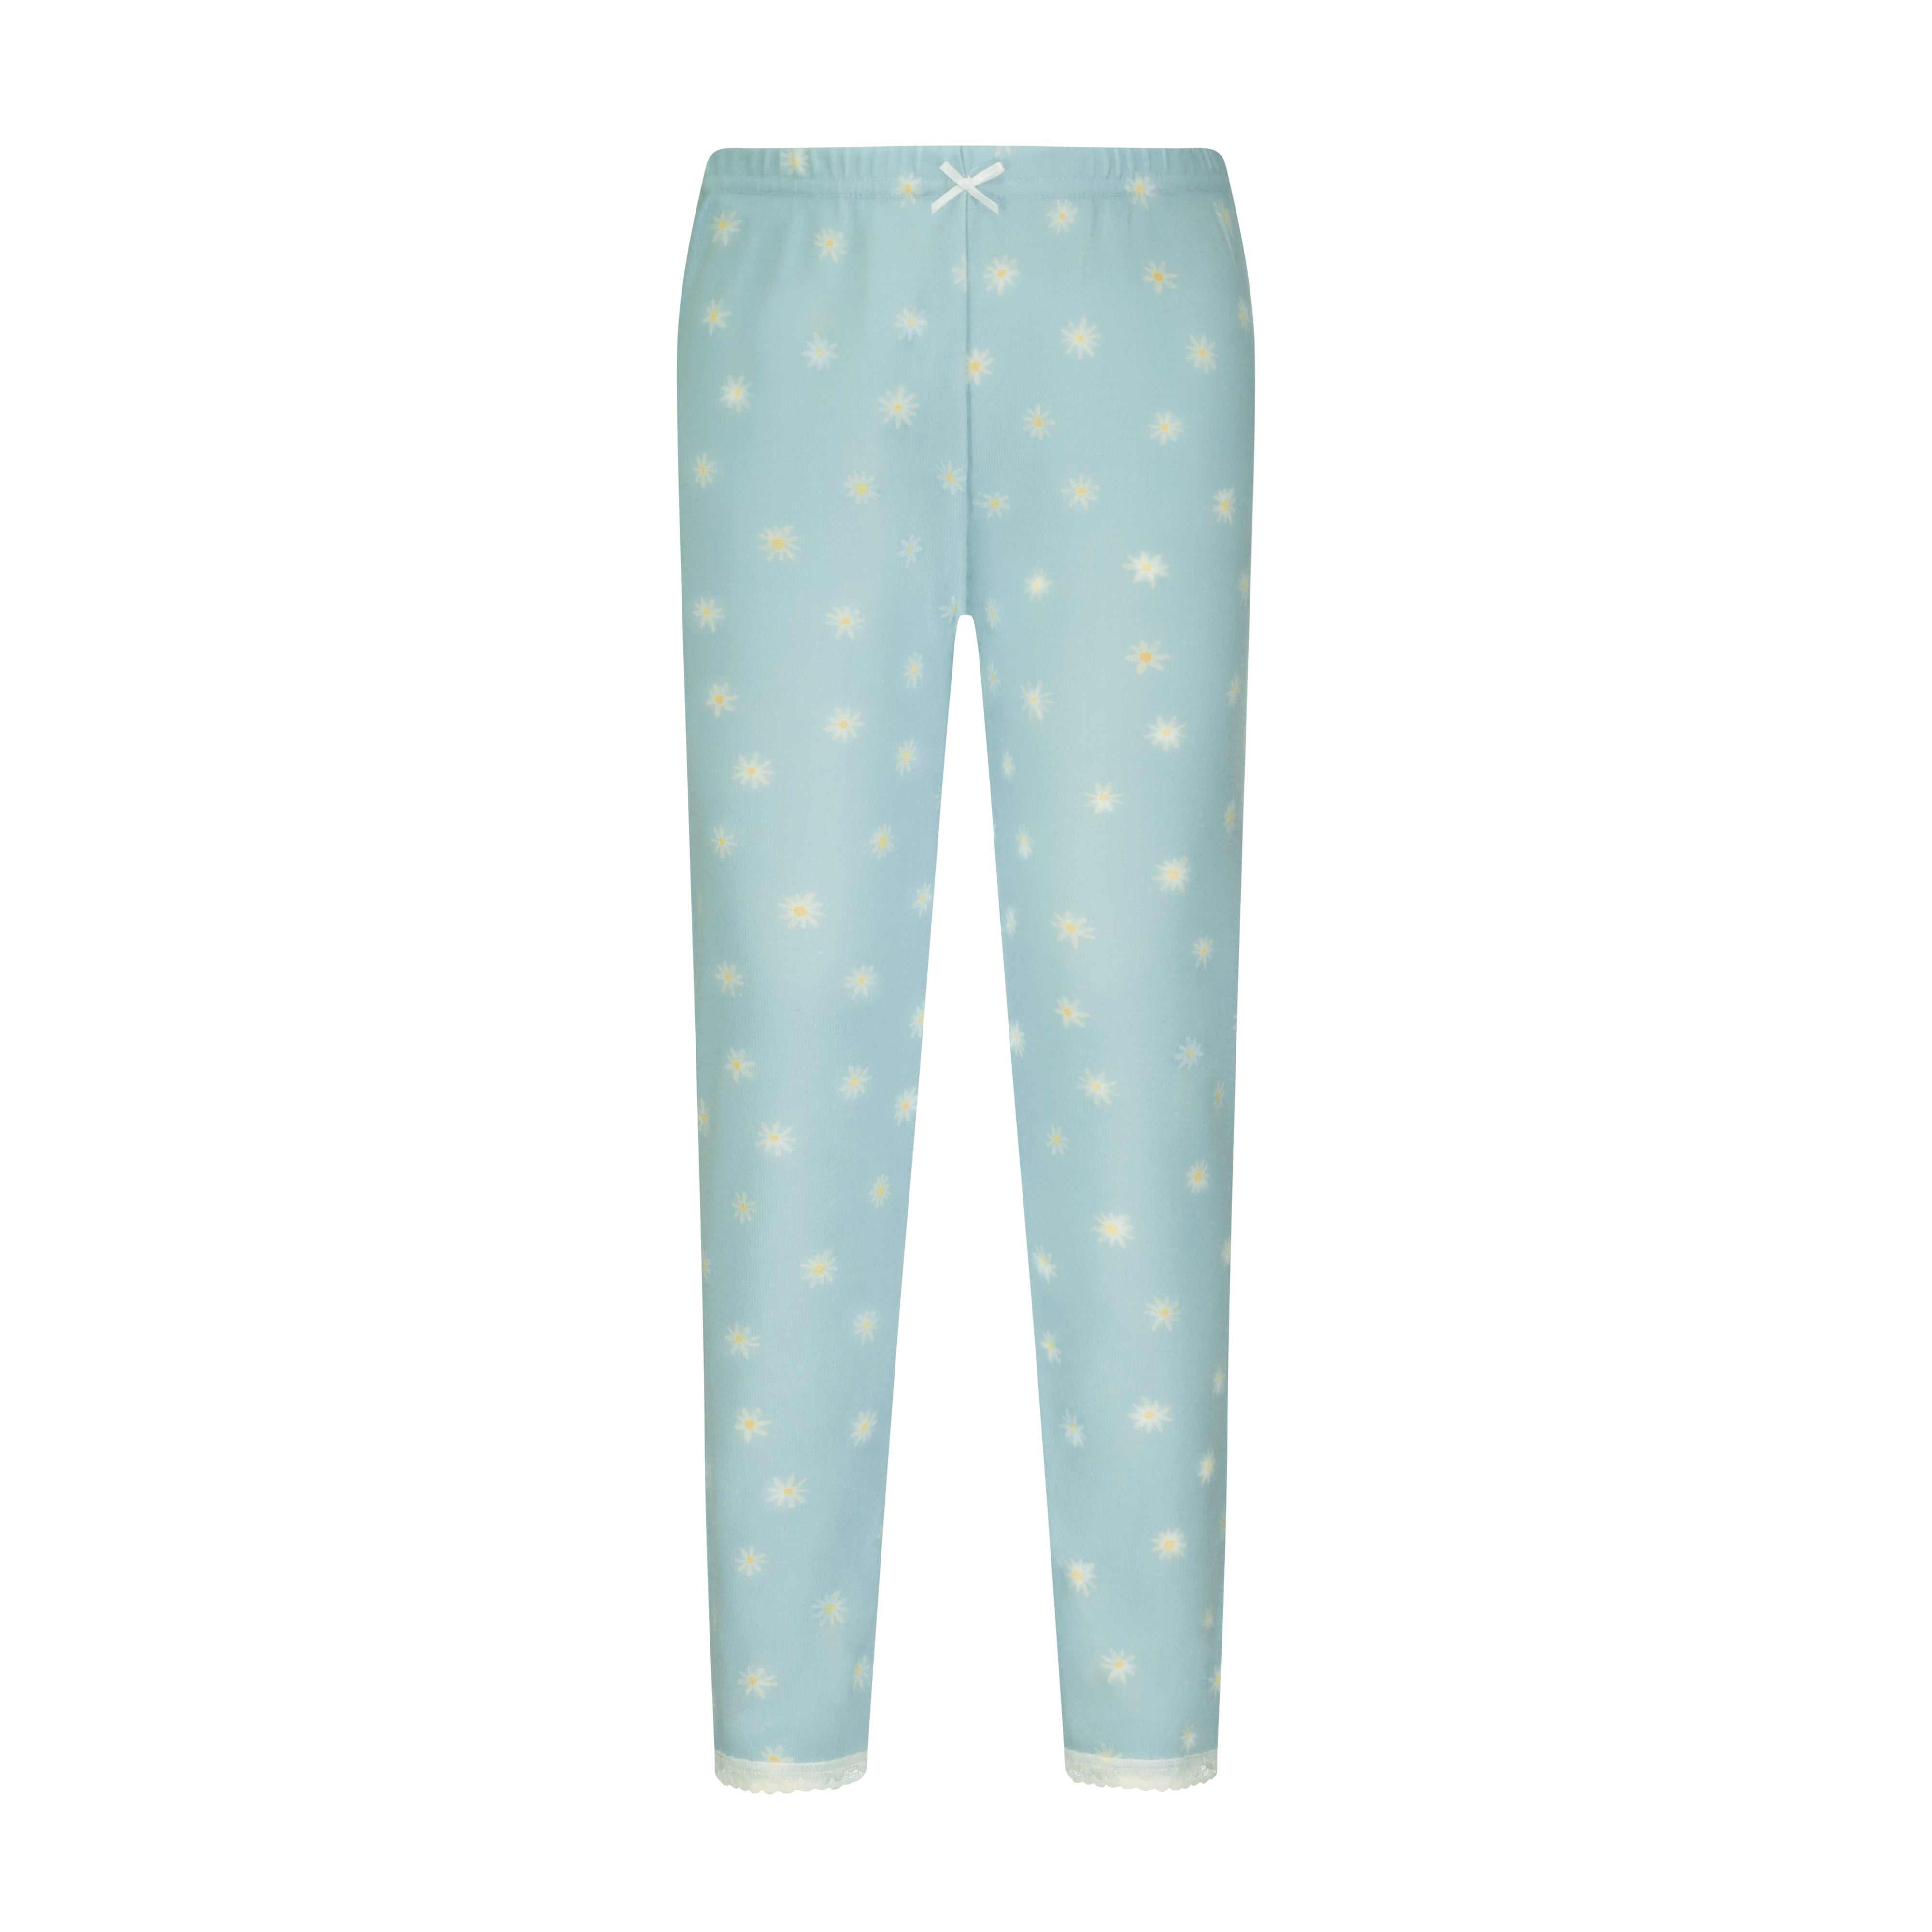 GIRLS SIMPLY DAISY Print PANT w Lace